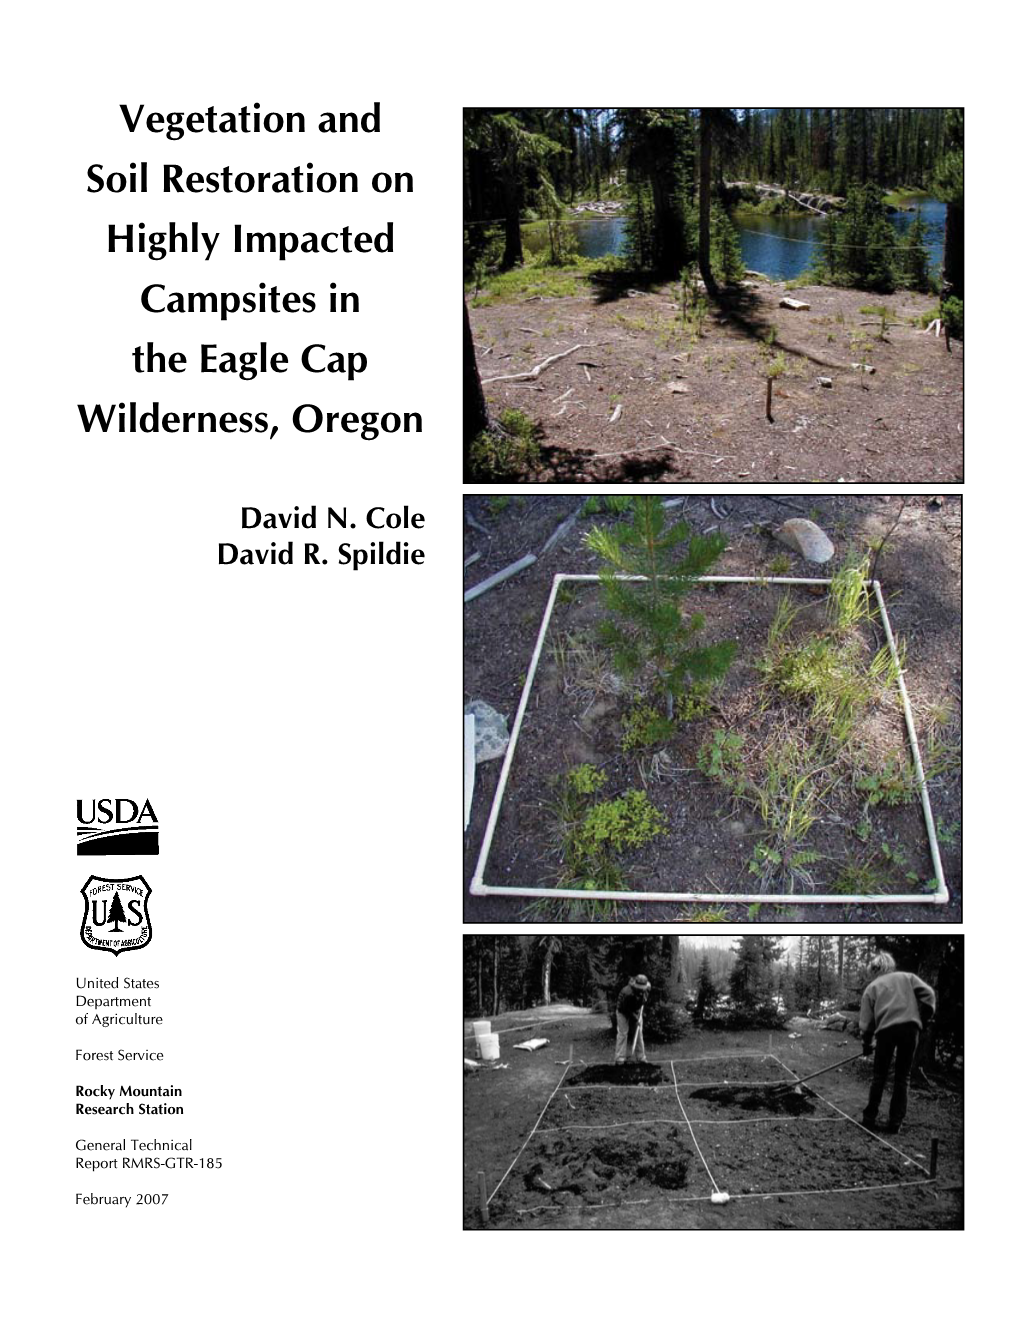 Vegetation and Soil Restoration on Highly Impacted Campsites in the Eagle Cap Wilderness, Oregon